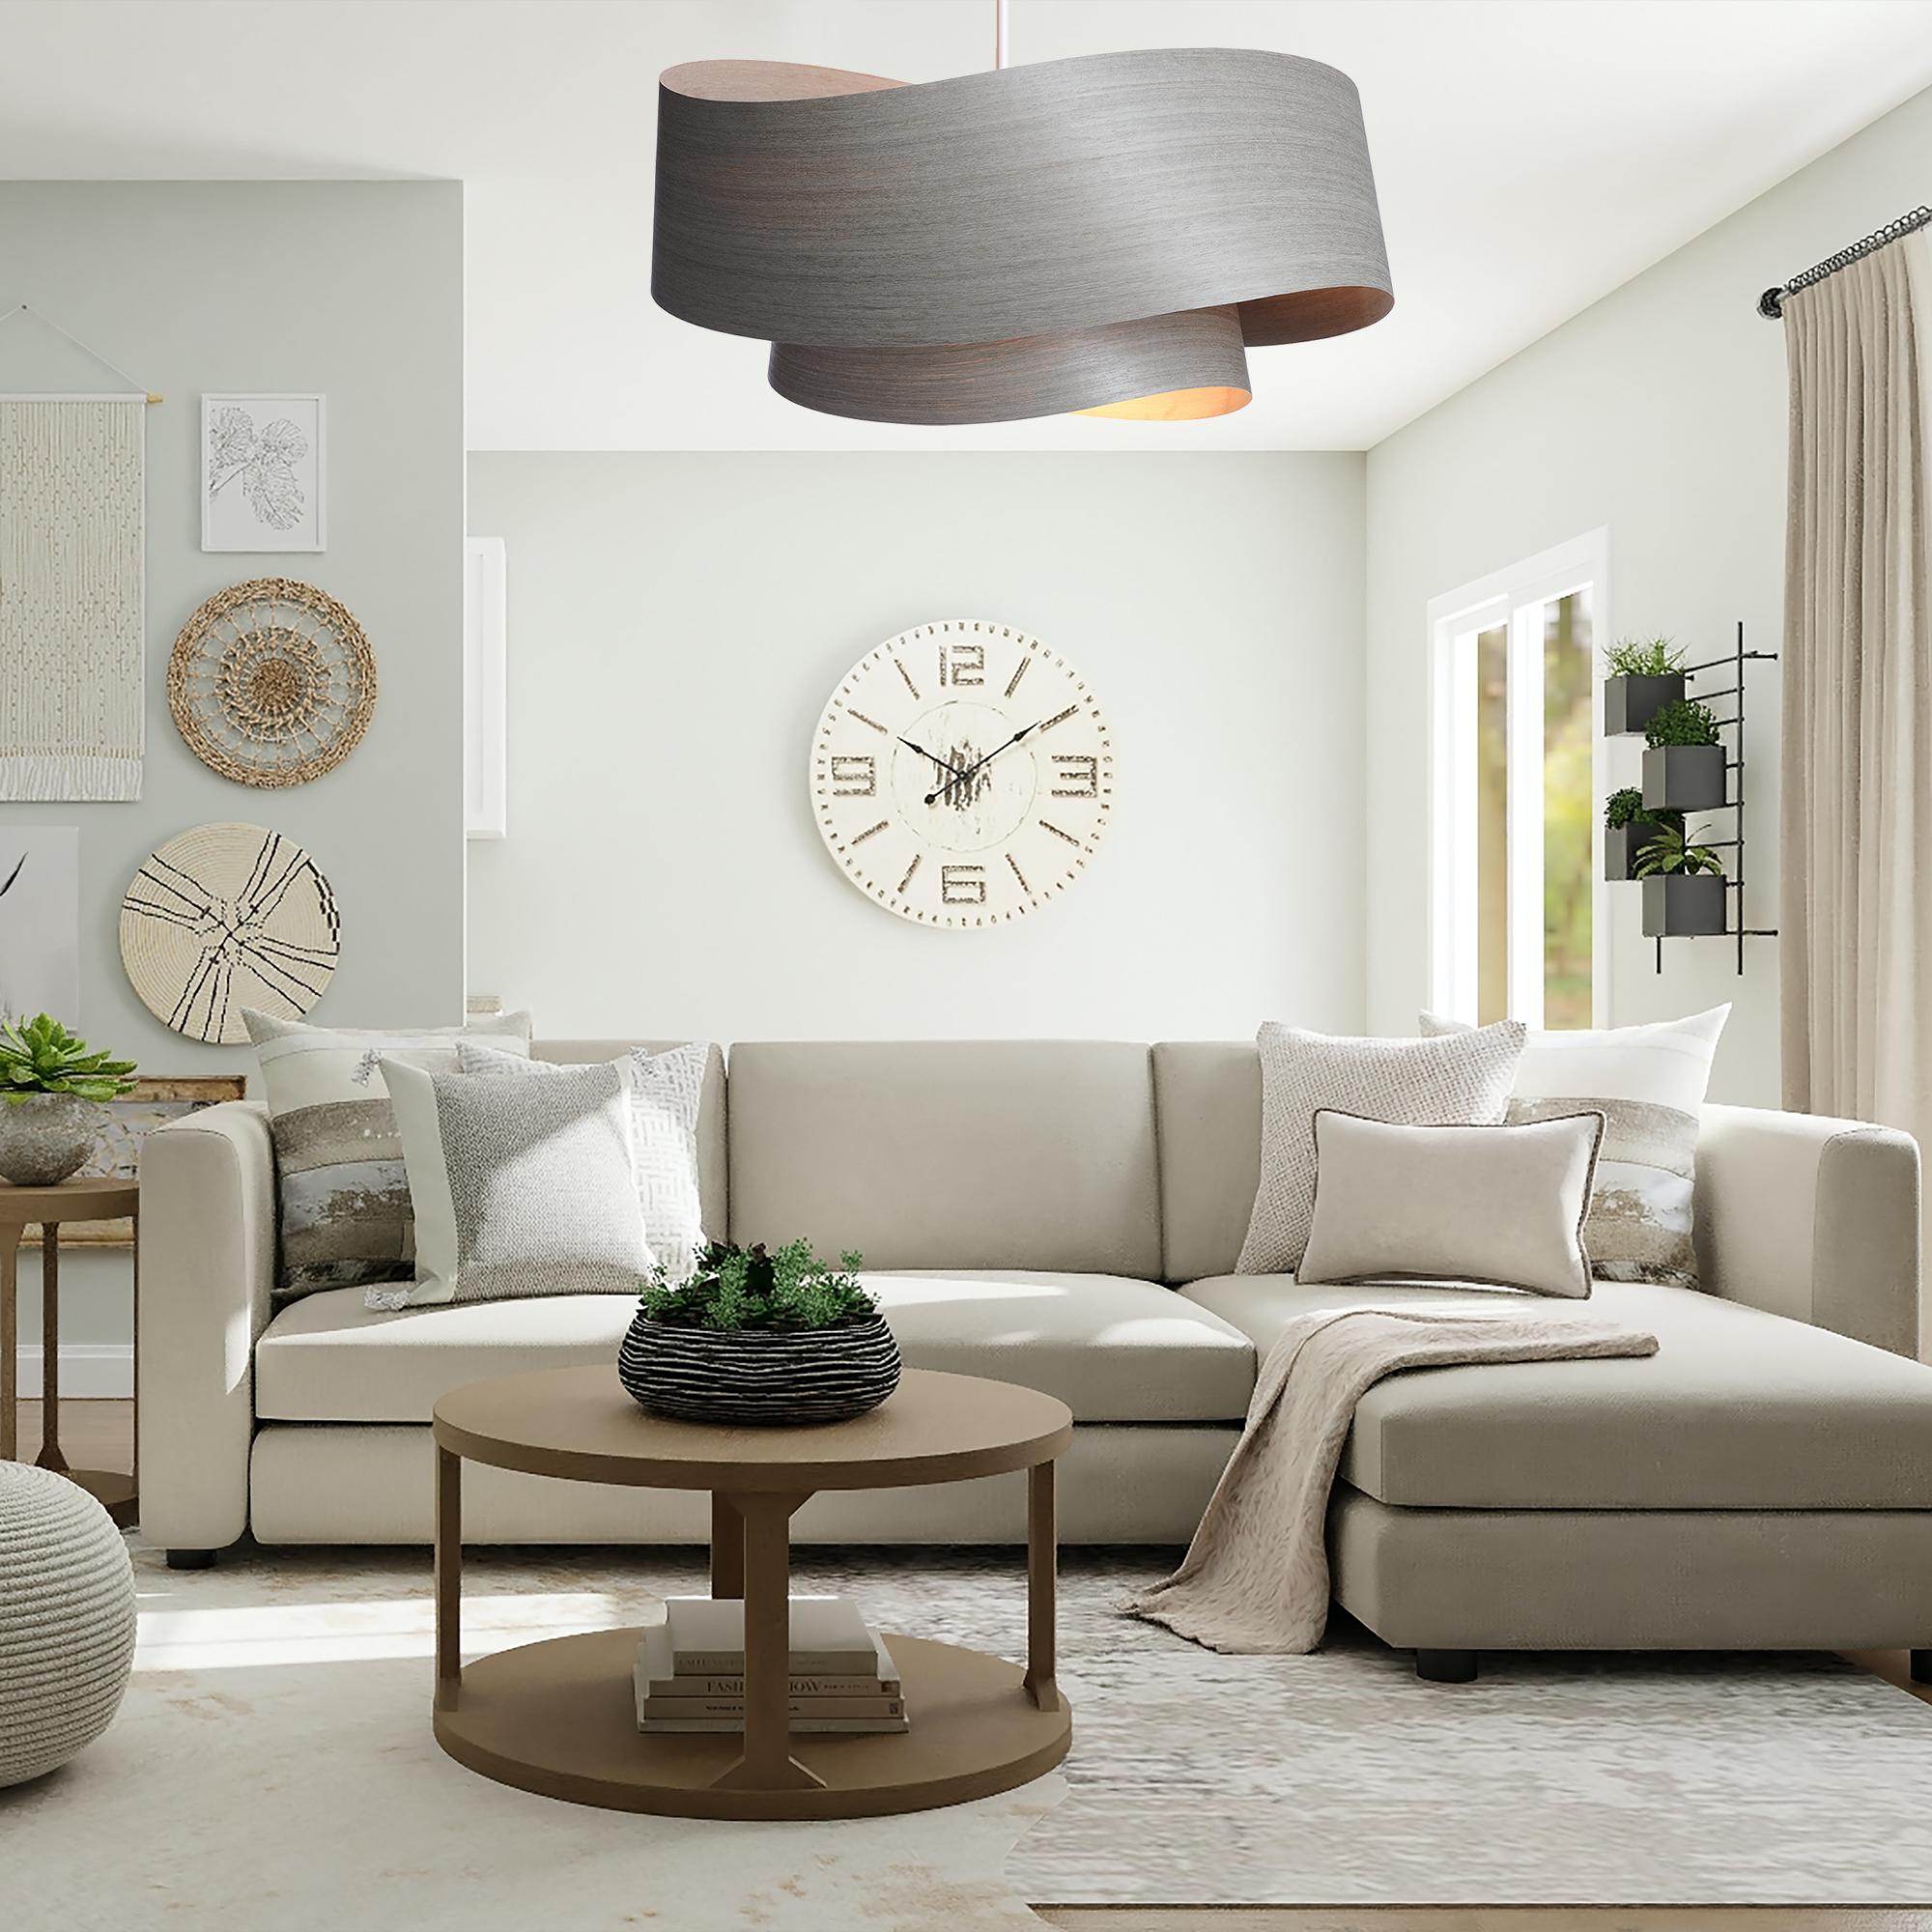 Add a touch of organic elegance to your home with this stunning mid-century modern gray tay veneer pendant light. Inspired by Danish modern design, its minimalist silhouette and warm gray tones create a warm and inviting atmosphere.

Handcrafted